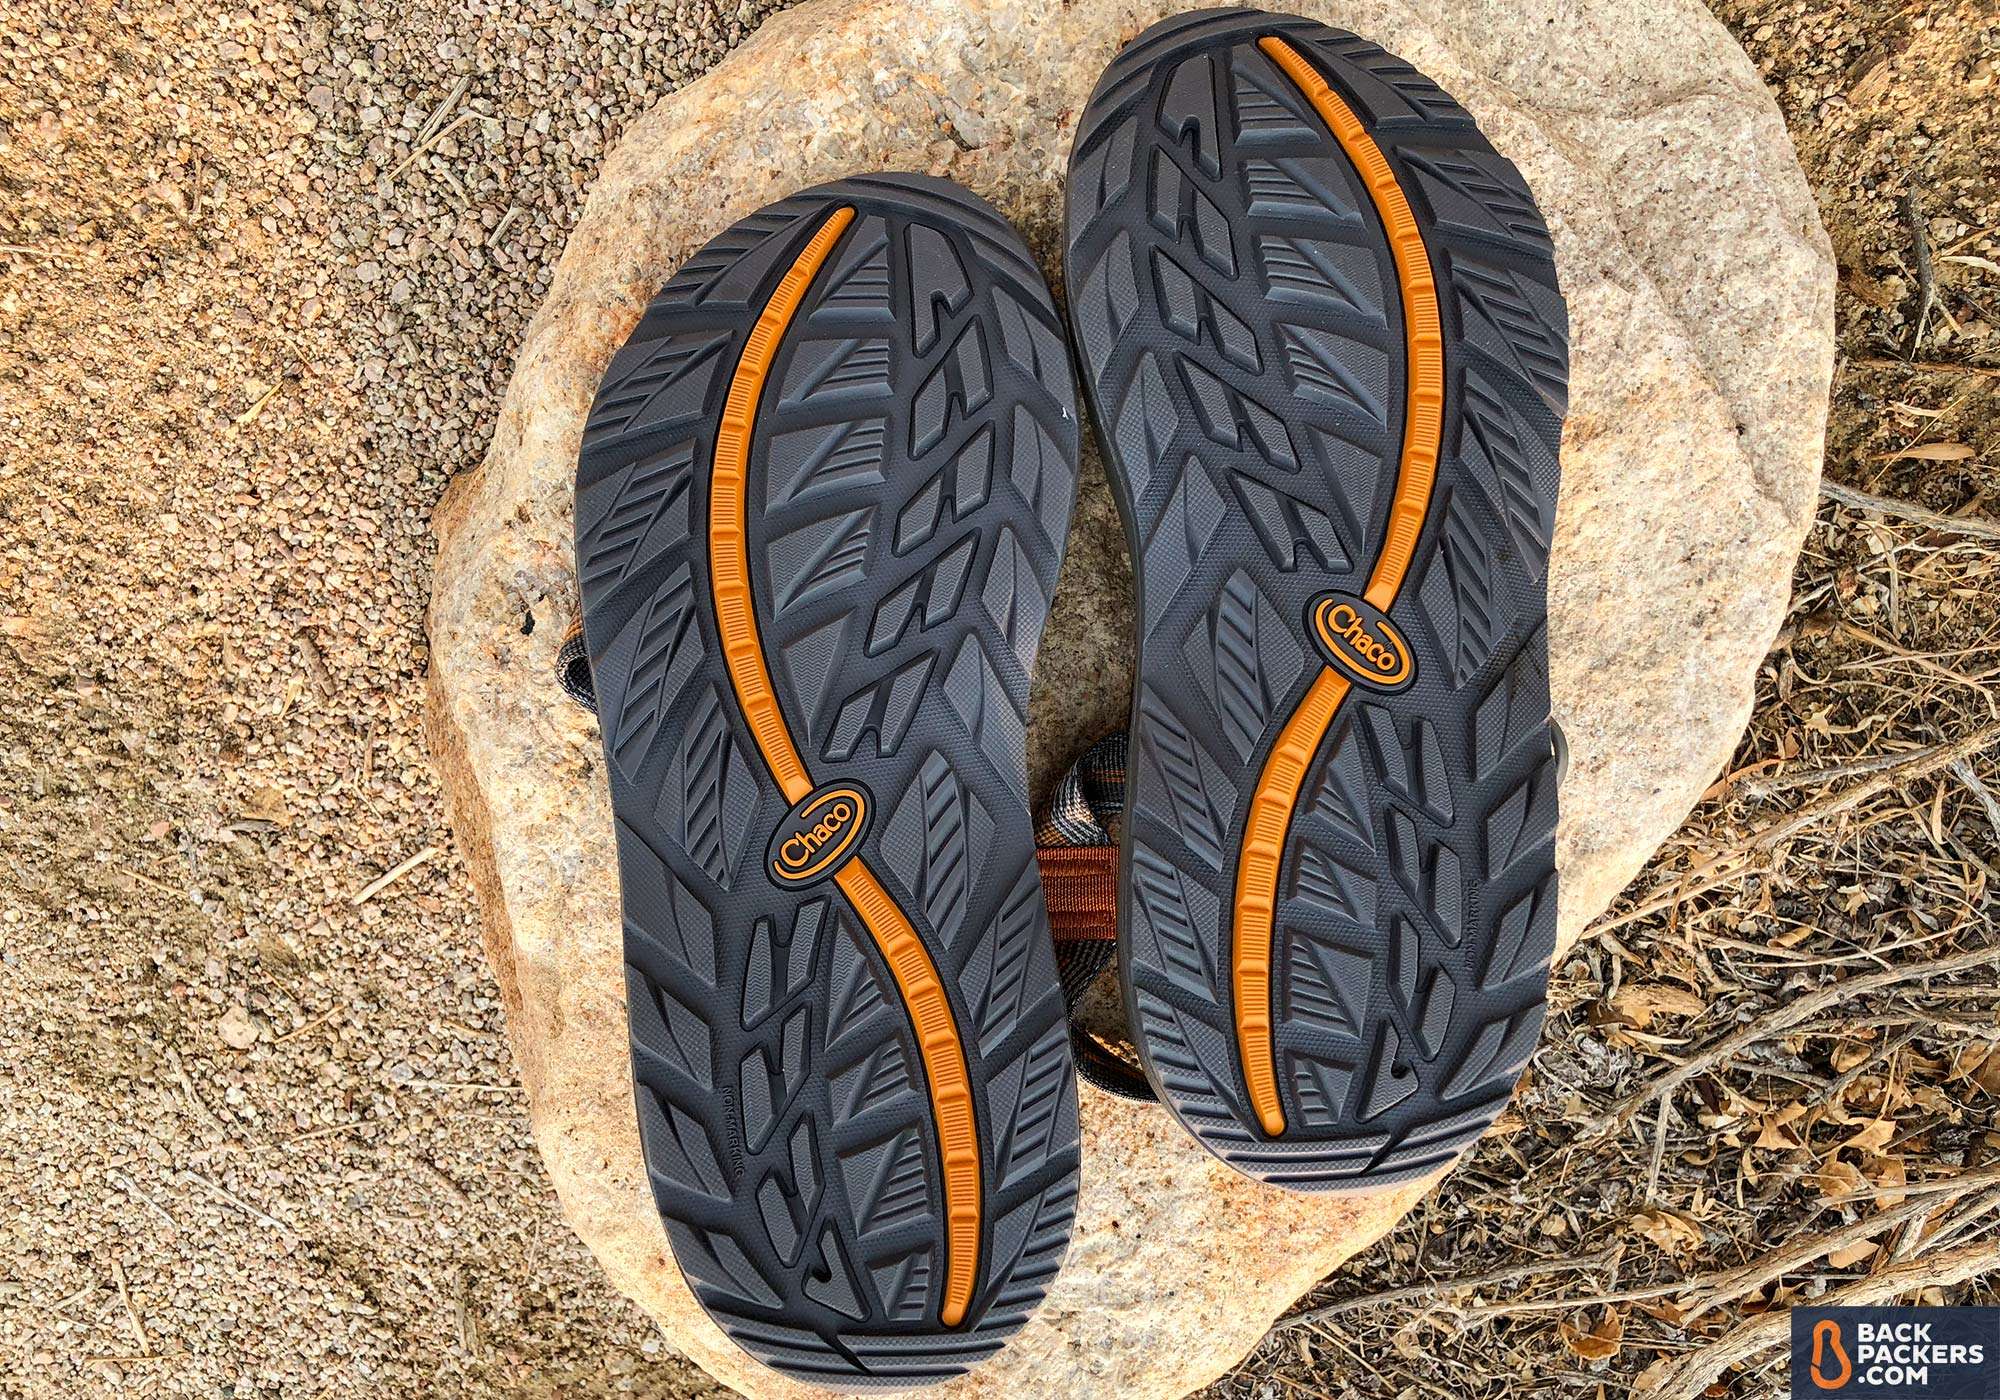 Chaco Z1 Classic Review | Rugged Hiking 